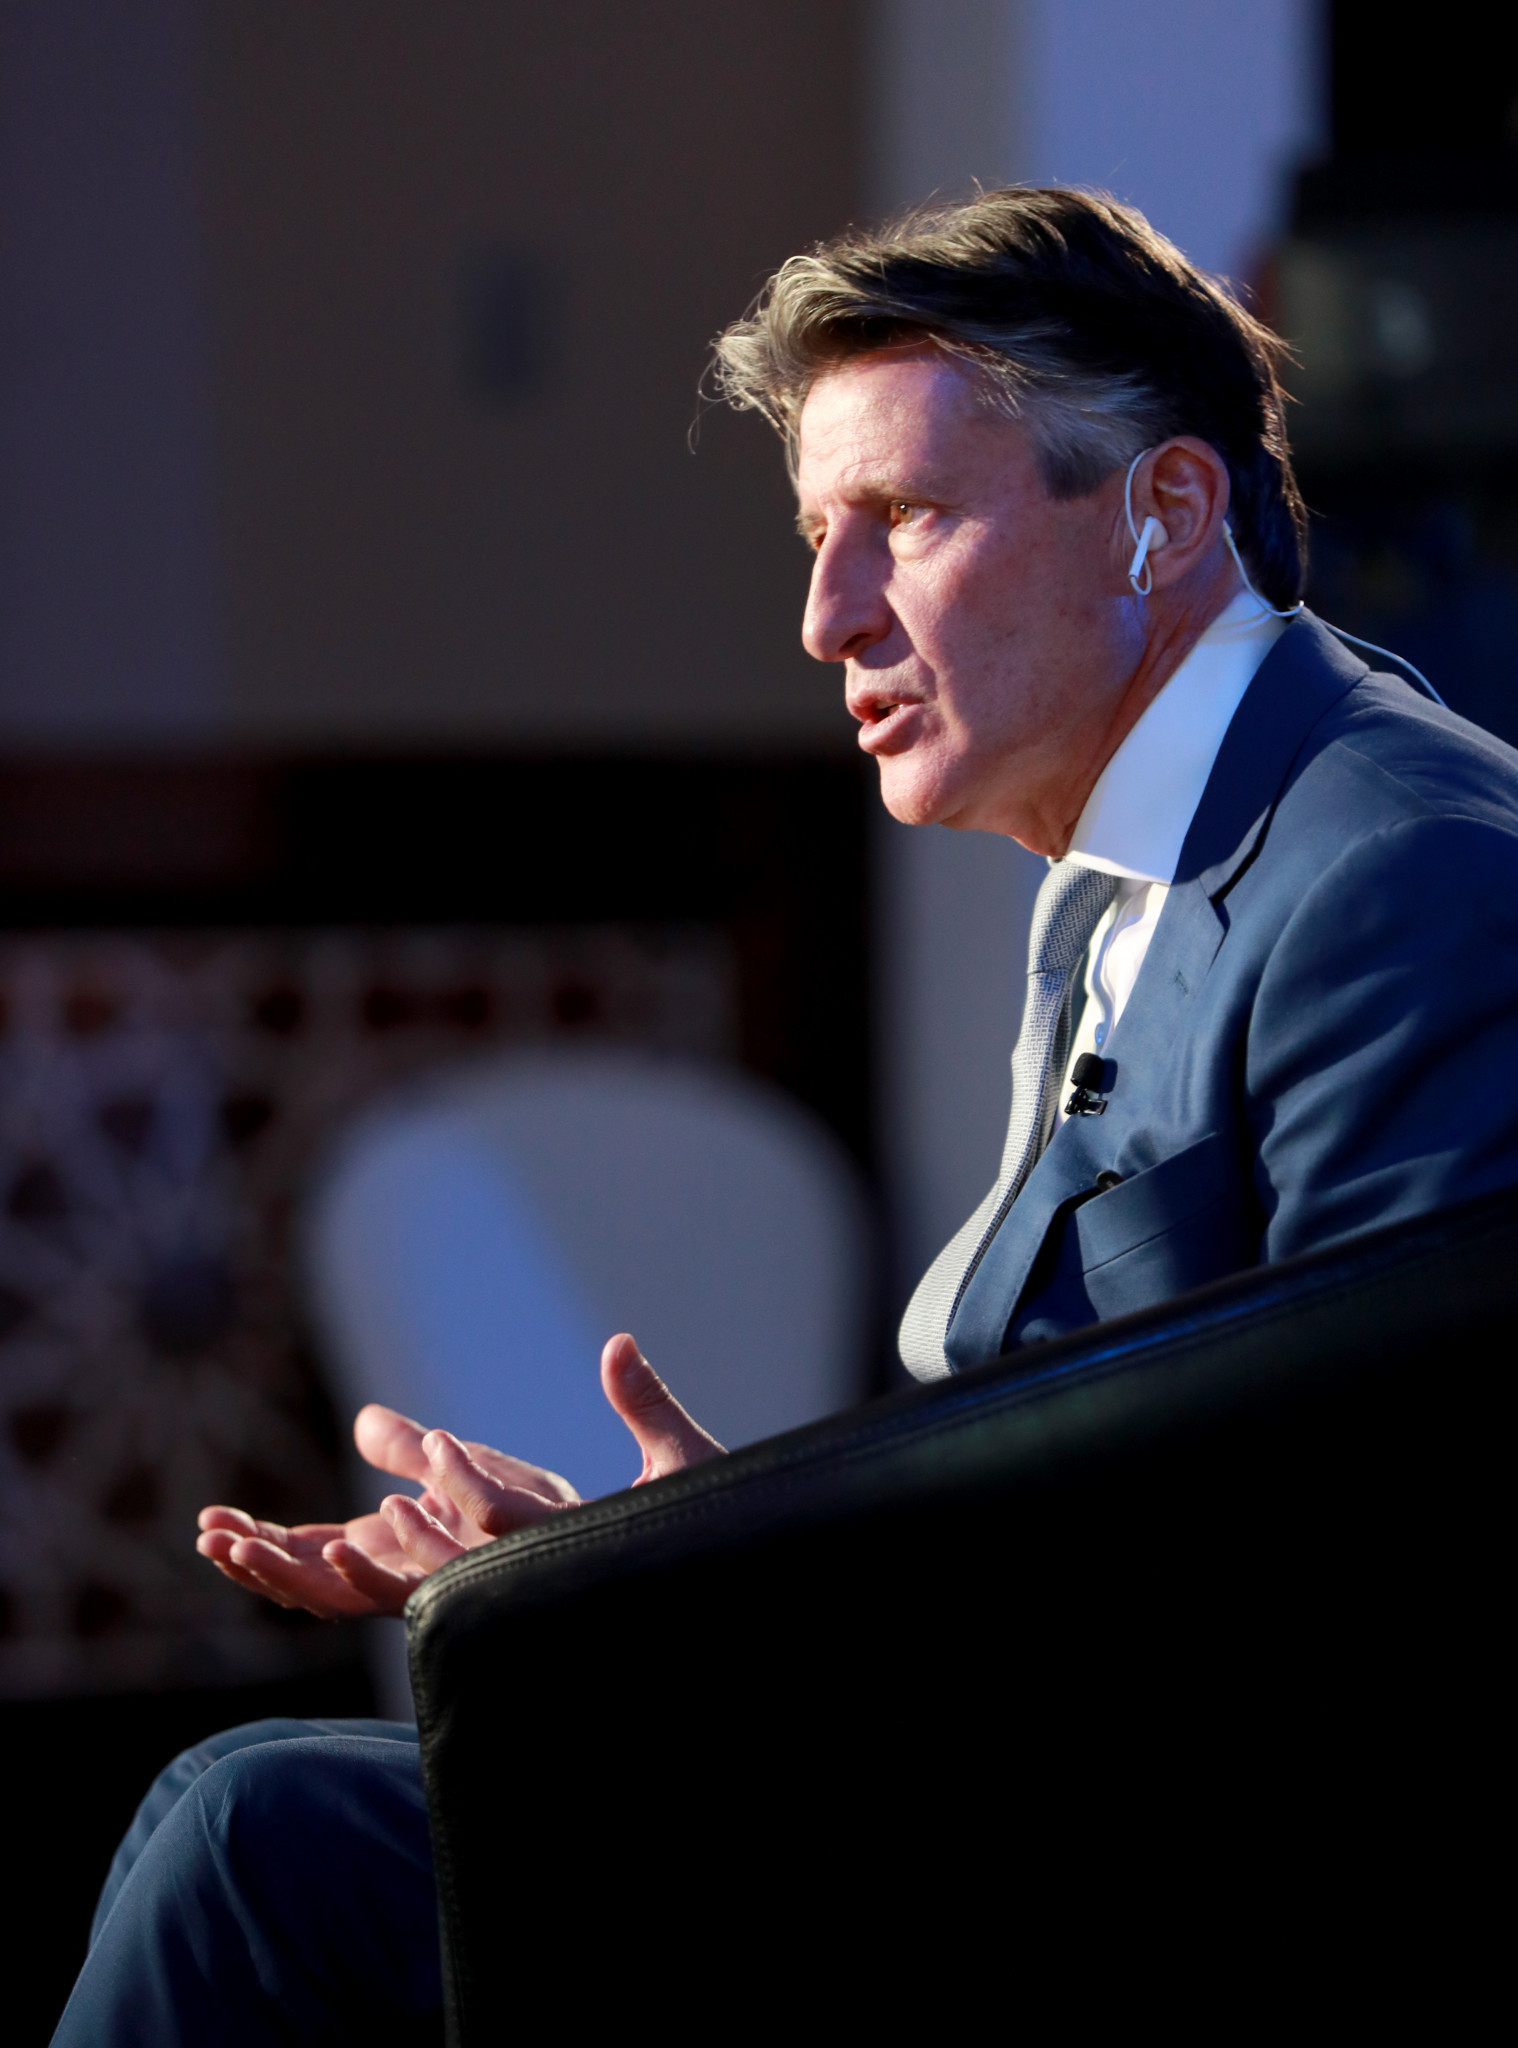 IAAF President Sebastian Coe said the dominant factor in the outcome of any competition is testosterone ©Getty Images